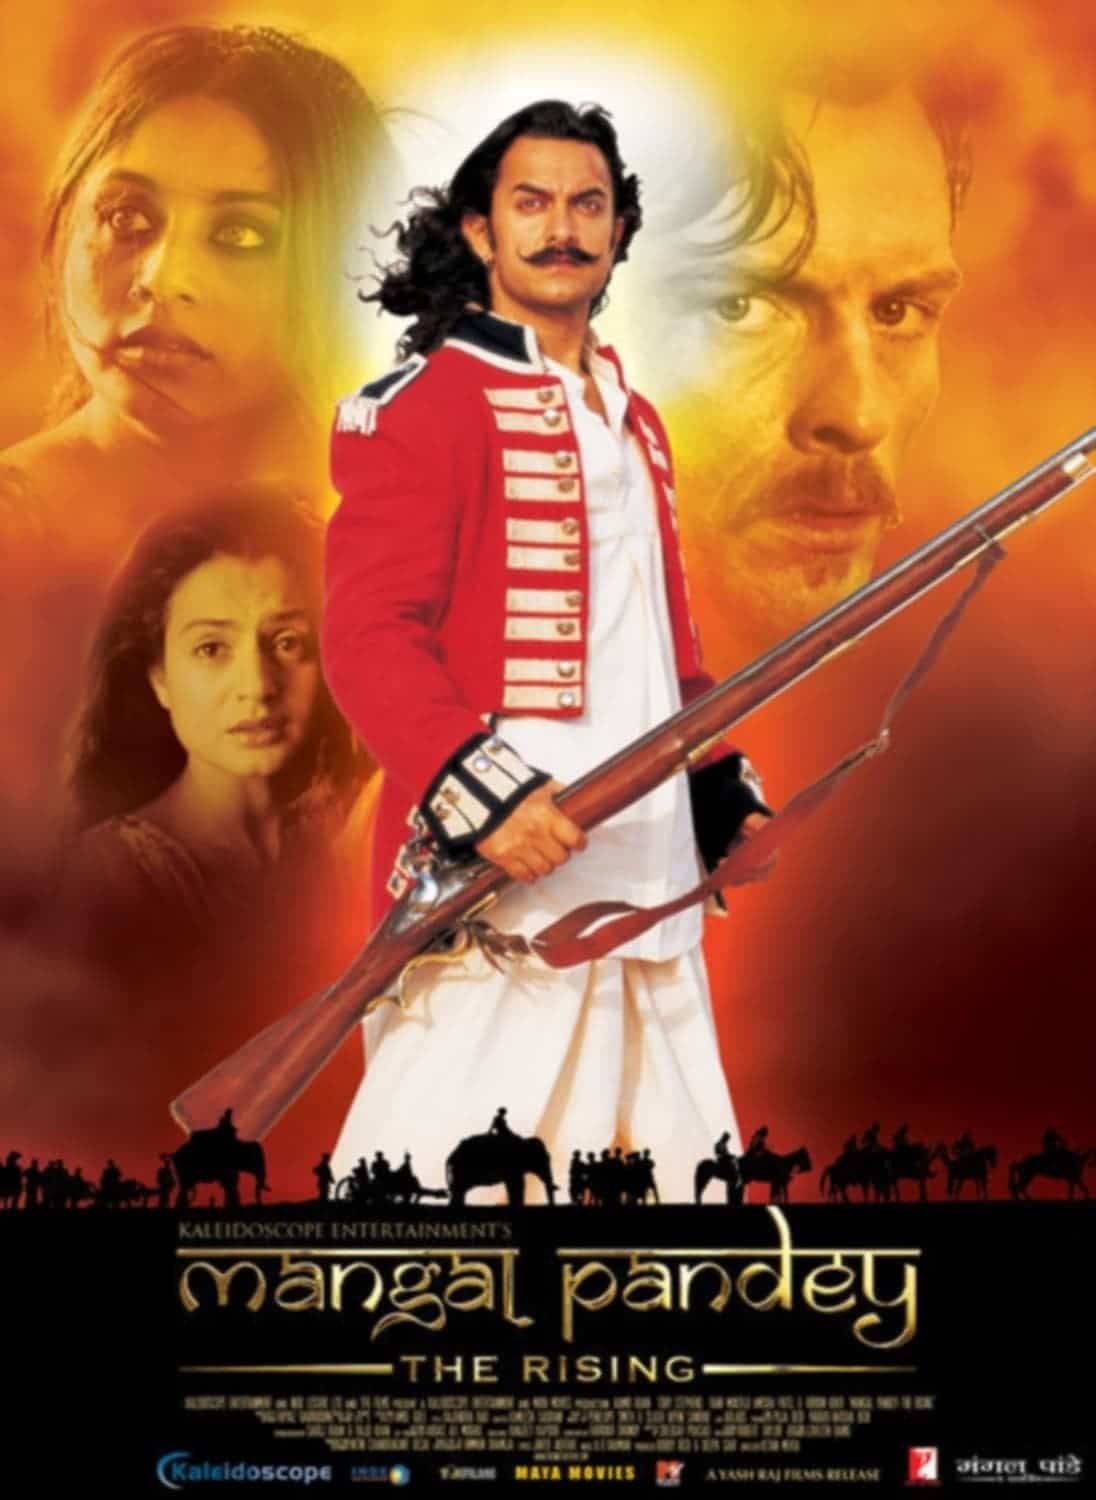 Poster for the movie "Mangal Pandey - The Rising"